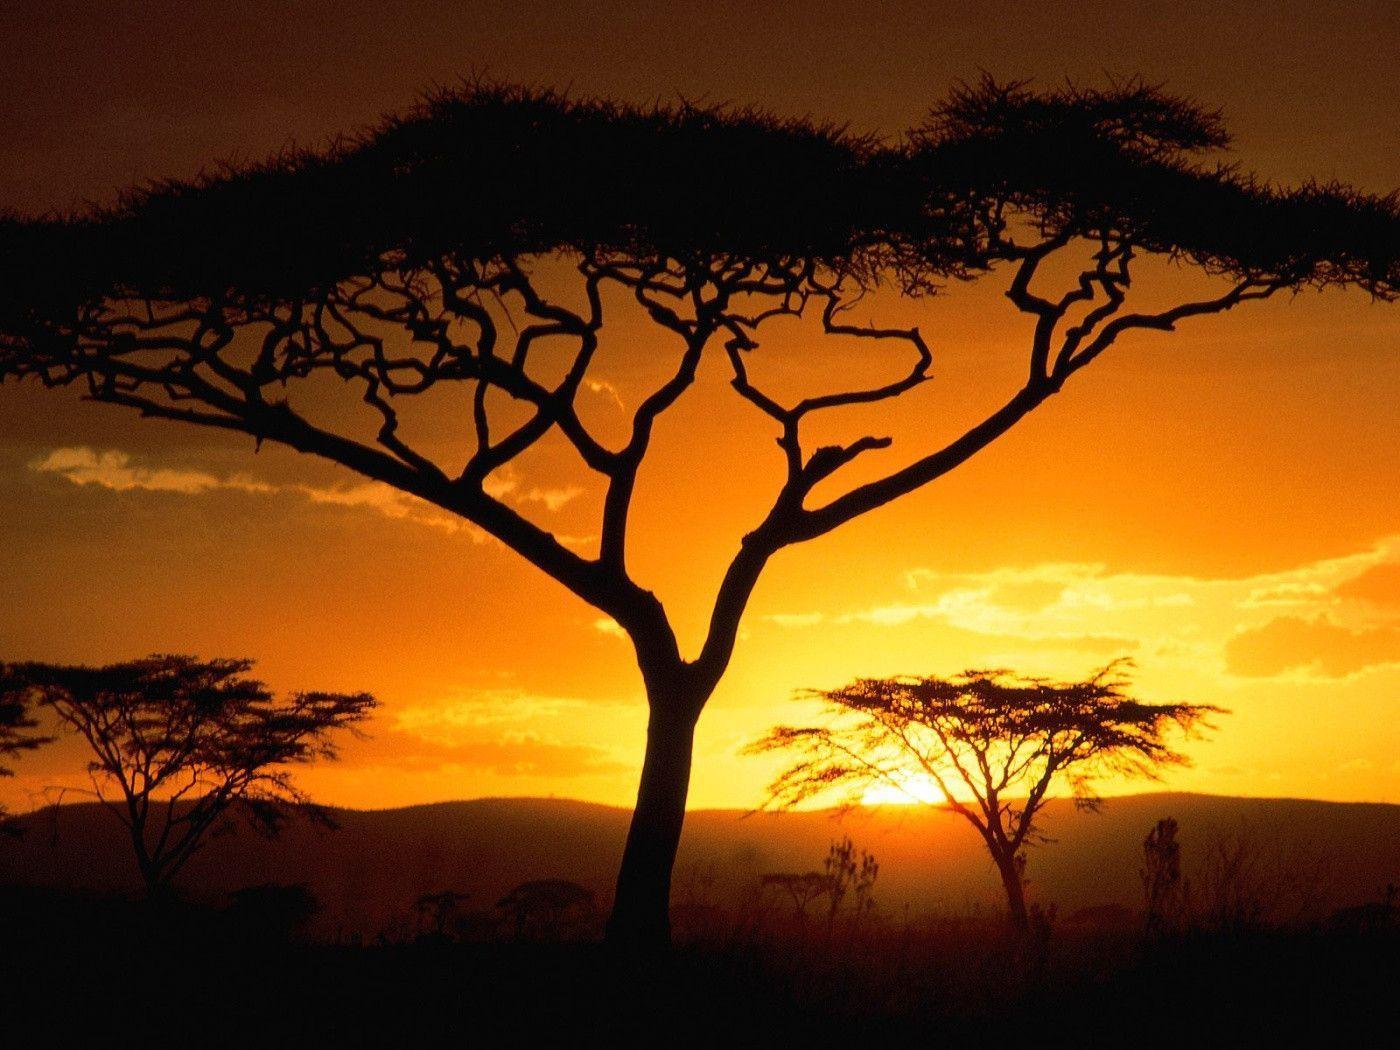 Africa Wallpapers - Wallpaper Cave